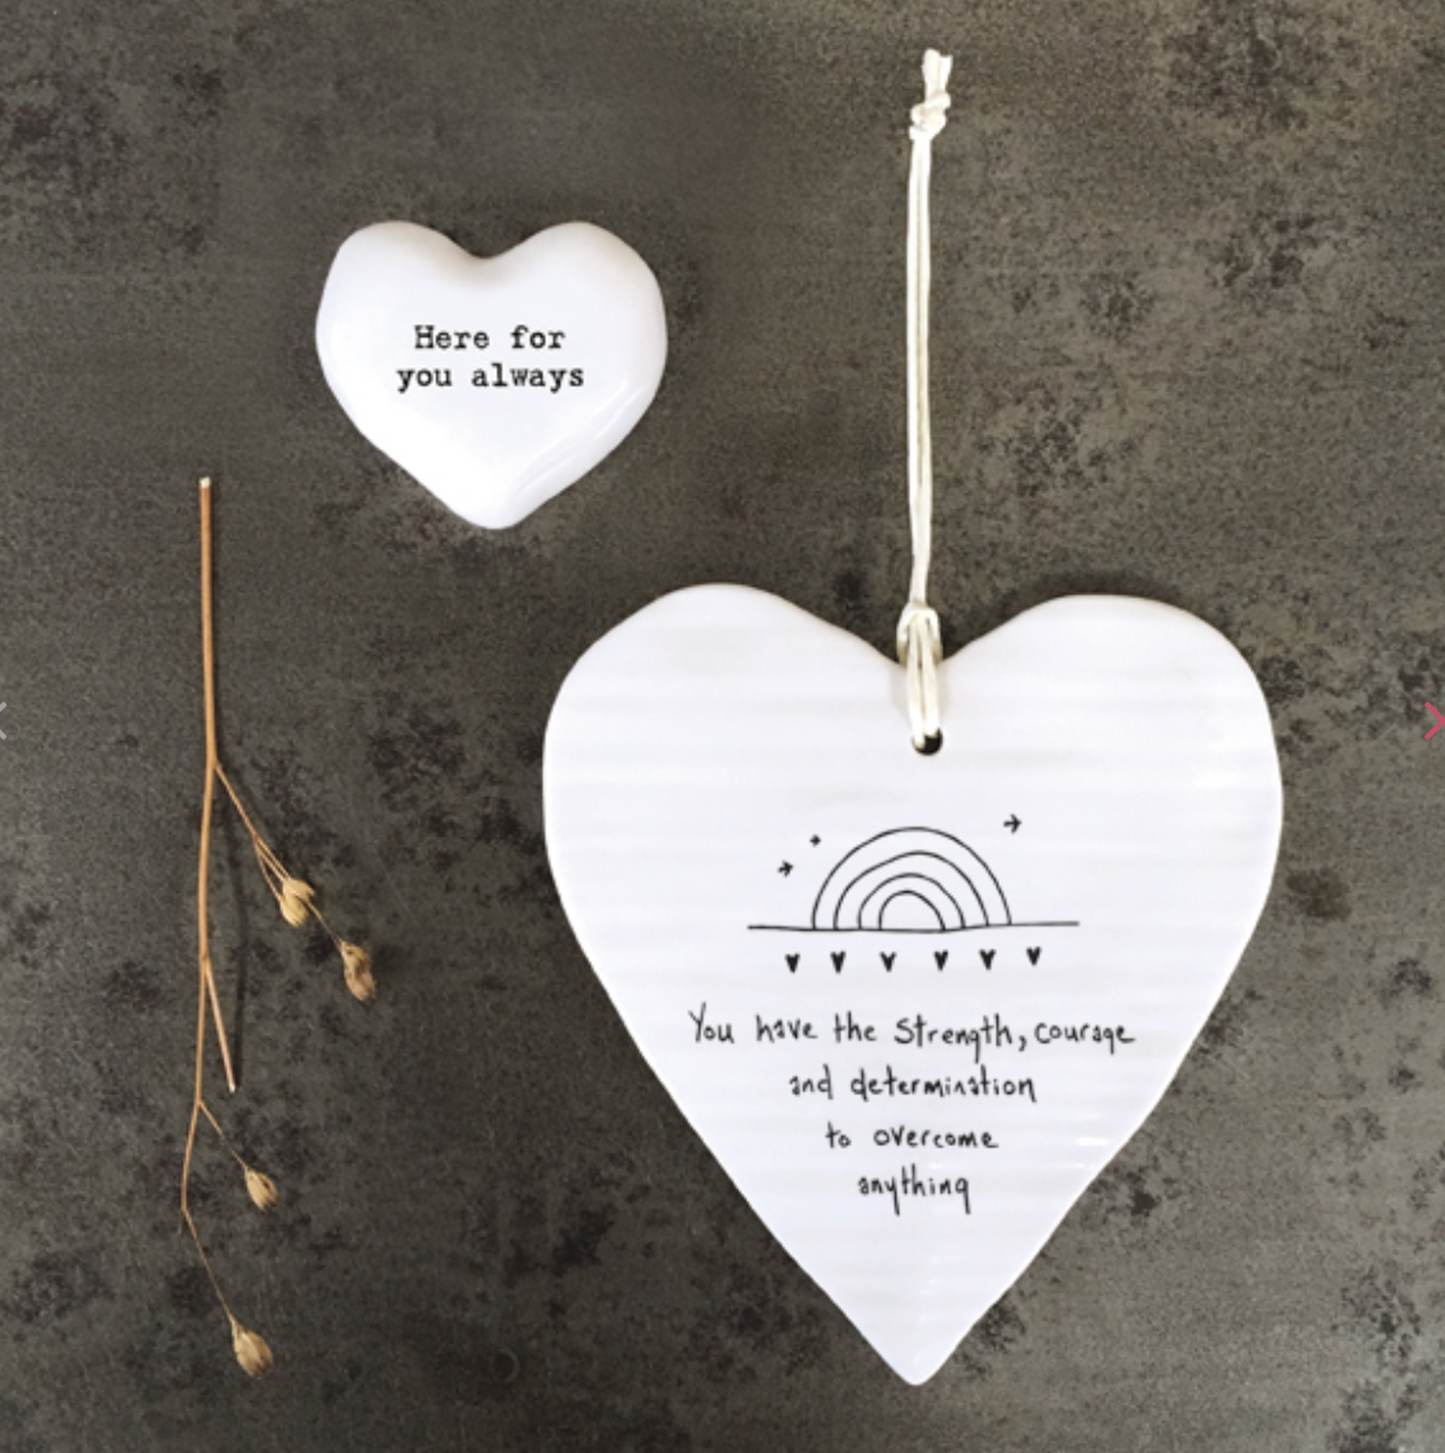 East Of India Porcelain Hanging Heart gift idea